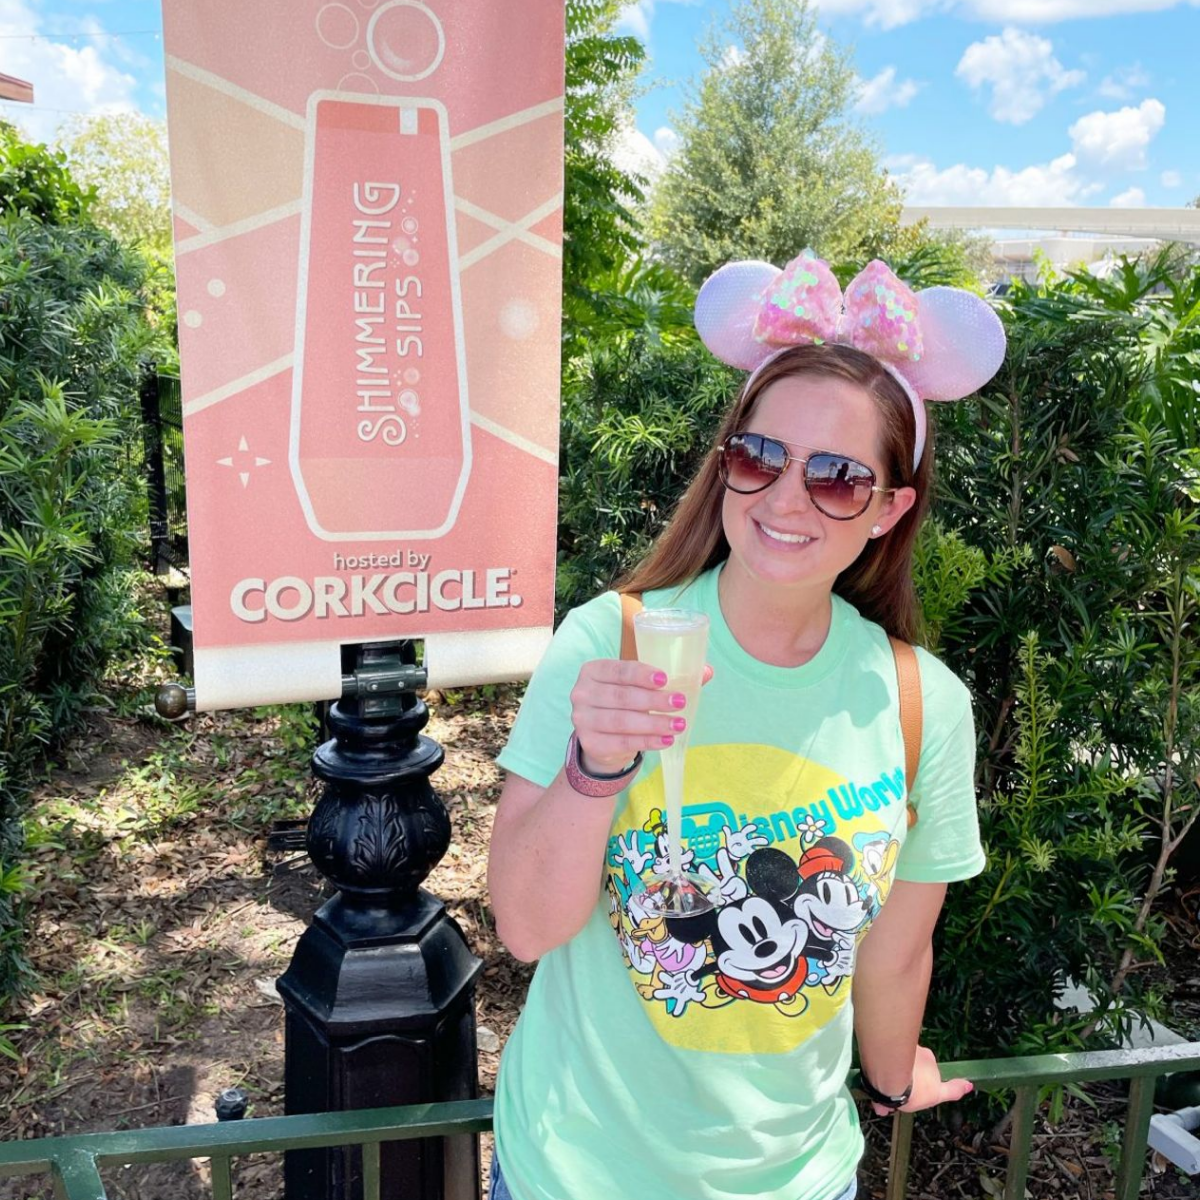 Epcot Food and Wine Festival Tips